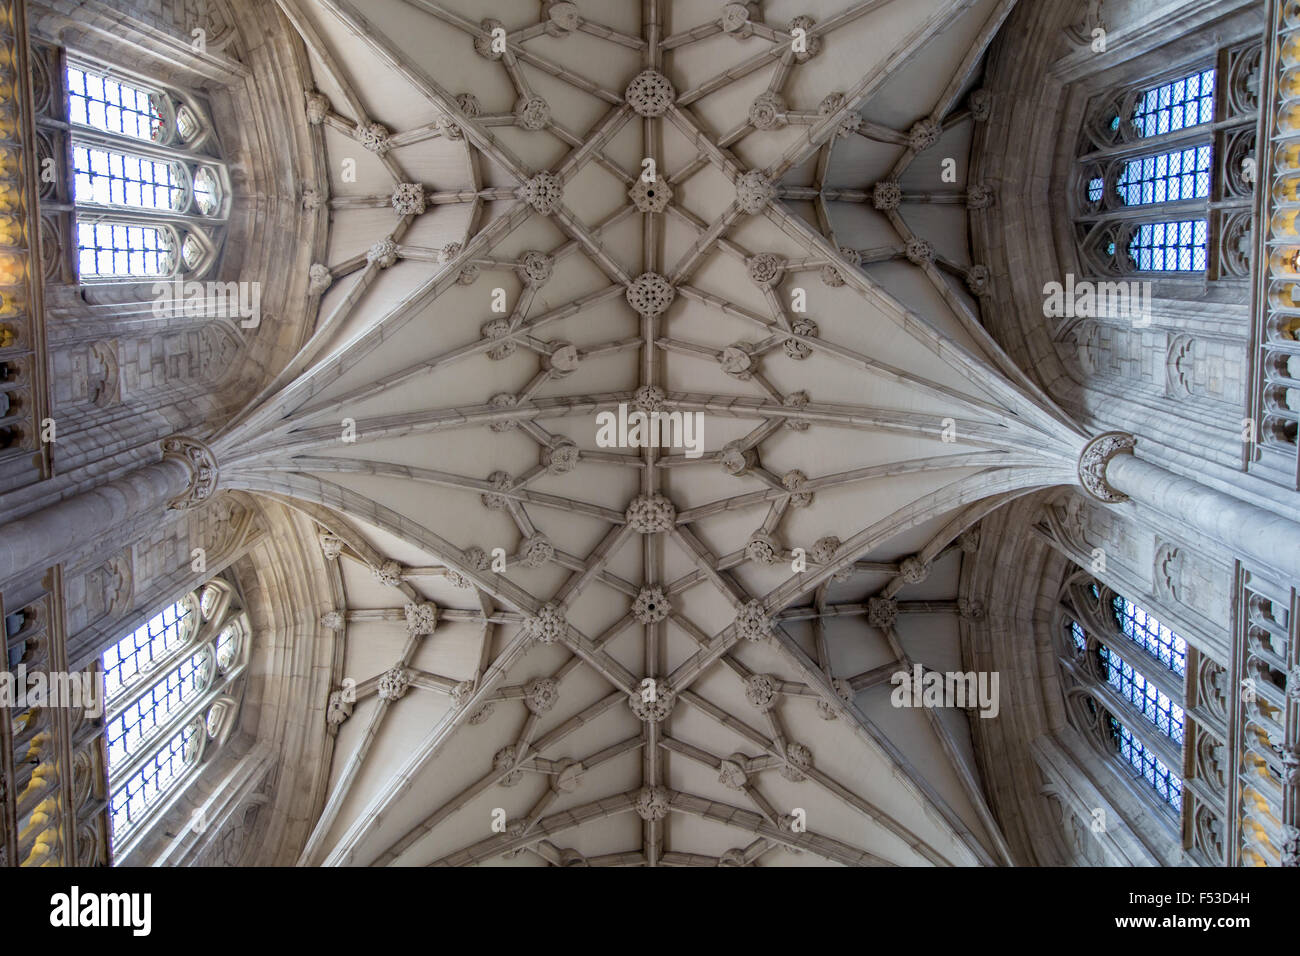 Vaulted ceiling of Winchester Cathedral nave, Hampshire, England Stock Photo